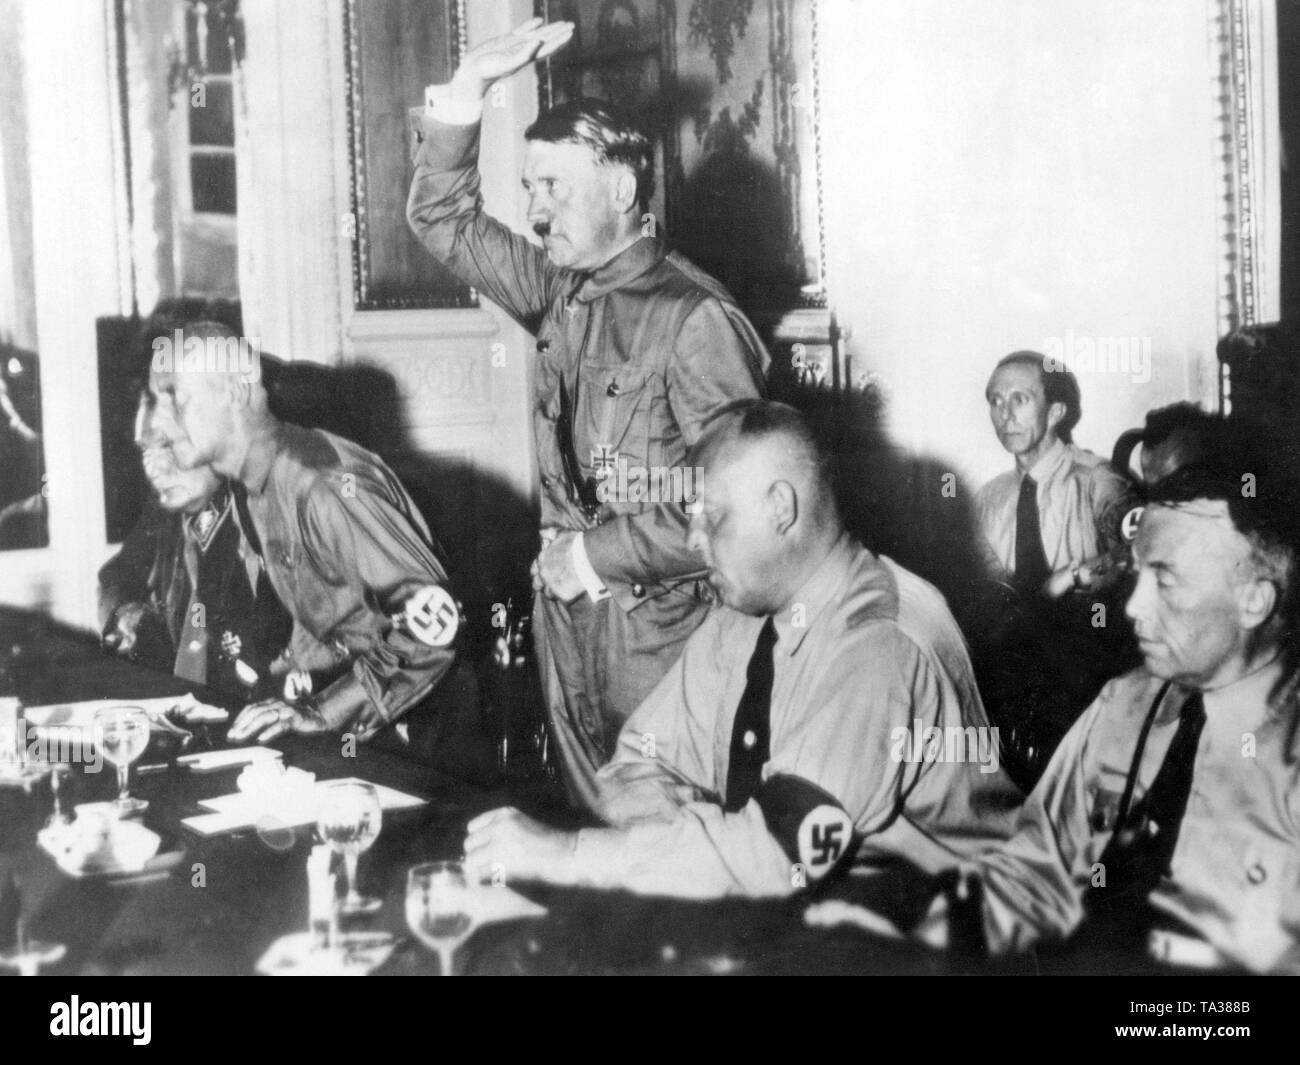 After the Reichstag election, the 230 deputies of the NSDAP were sworn in by the party leaders in Hotel Kaiserhof in Berlin. From left to right: Hermann Goering, Wilhelm Frick, Adolf Hitler, Gregor Strasser, and Joseph Goebbels in the background. Stock Photo